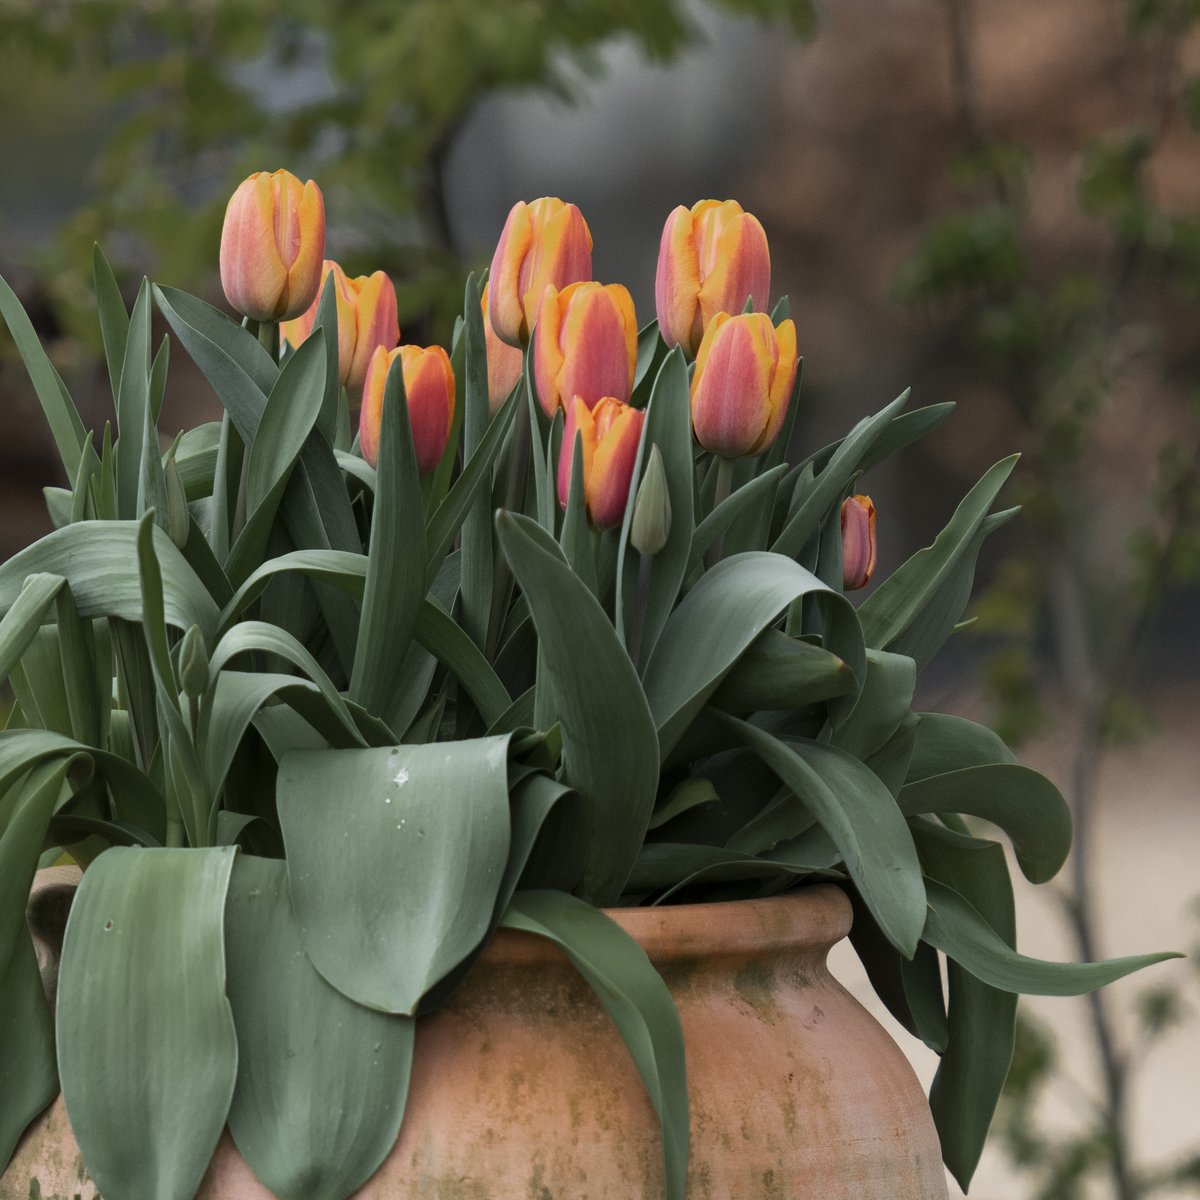 Next week is November and that’s the month to start planting tulip bulbs. Head to crocus.co.uk to shop up to 50% off bulbs. #mycrocus #tulips #springbulbs